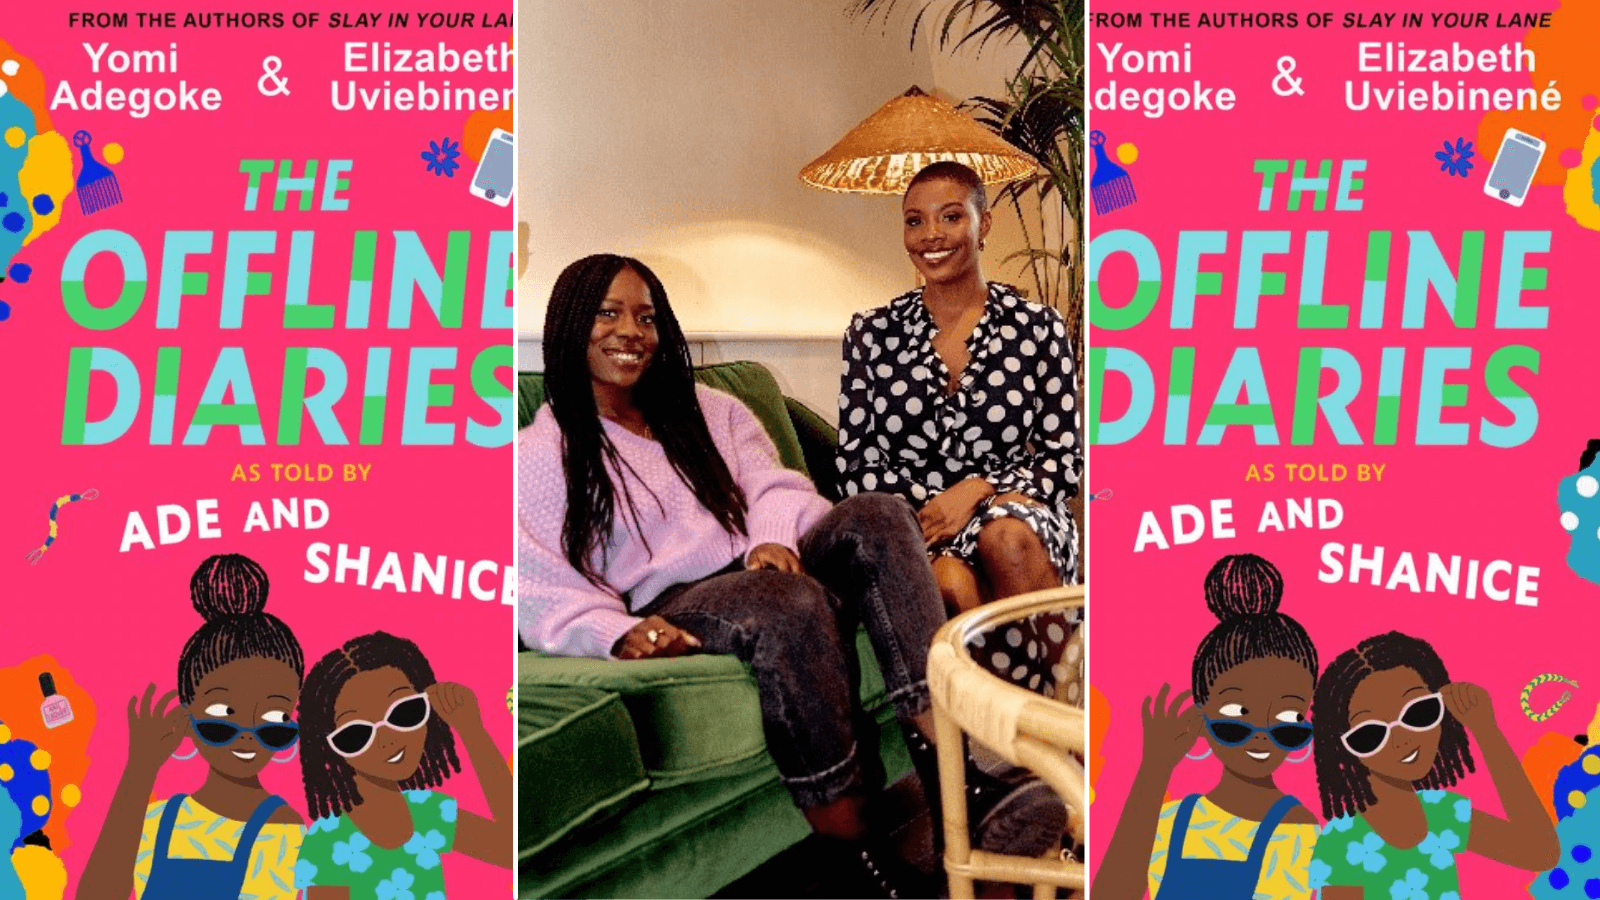 Slay in Your Lane authors to release children’s series ‘The Offline Diaries’